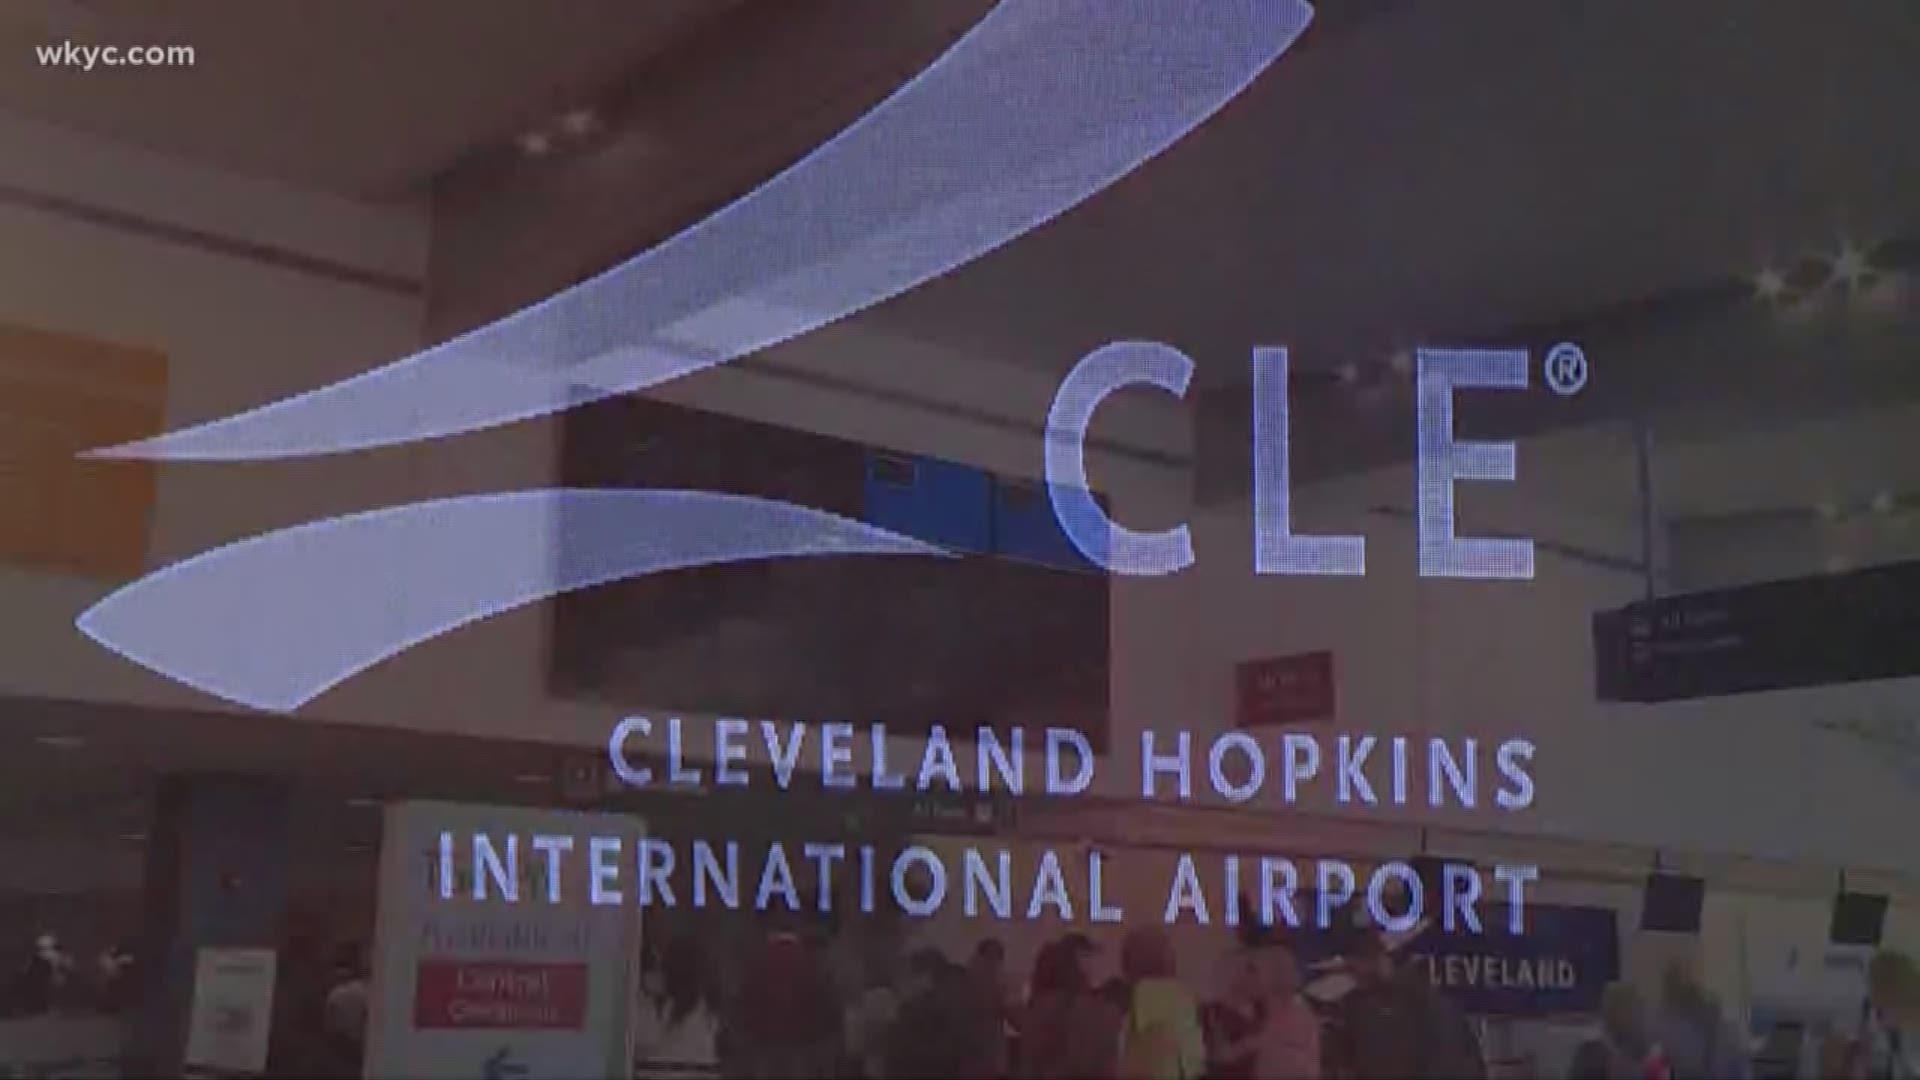 April 23, 2019: If you're a passenger at Cleveland Hopkins Airport looking for updates on flight arrivals, departures and baggage claims you might be in a bit of trouble.